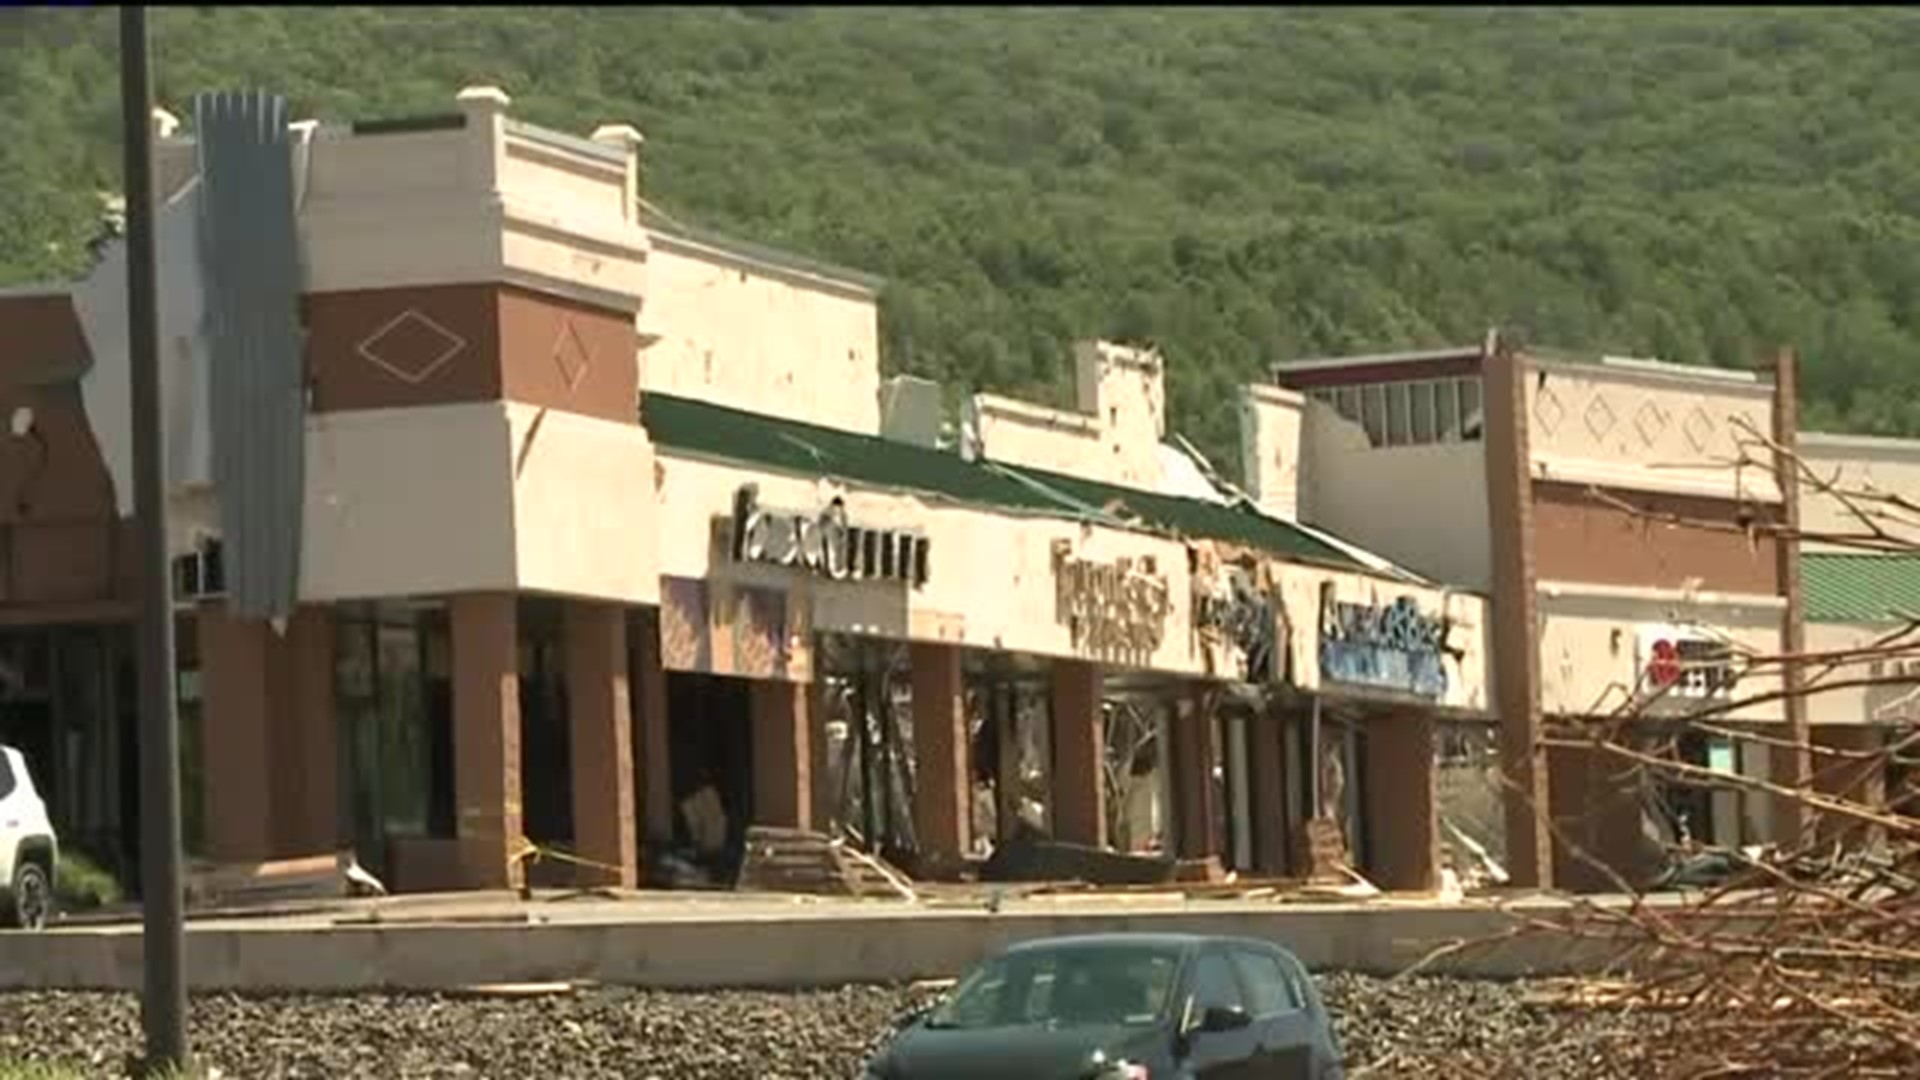 Viewing, Assessing Tornado Damage as Businesses Try to Reopen